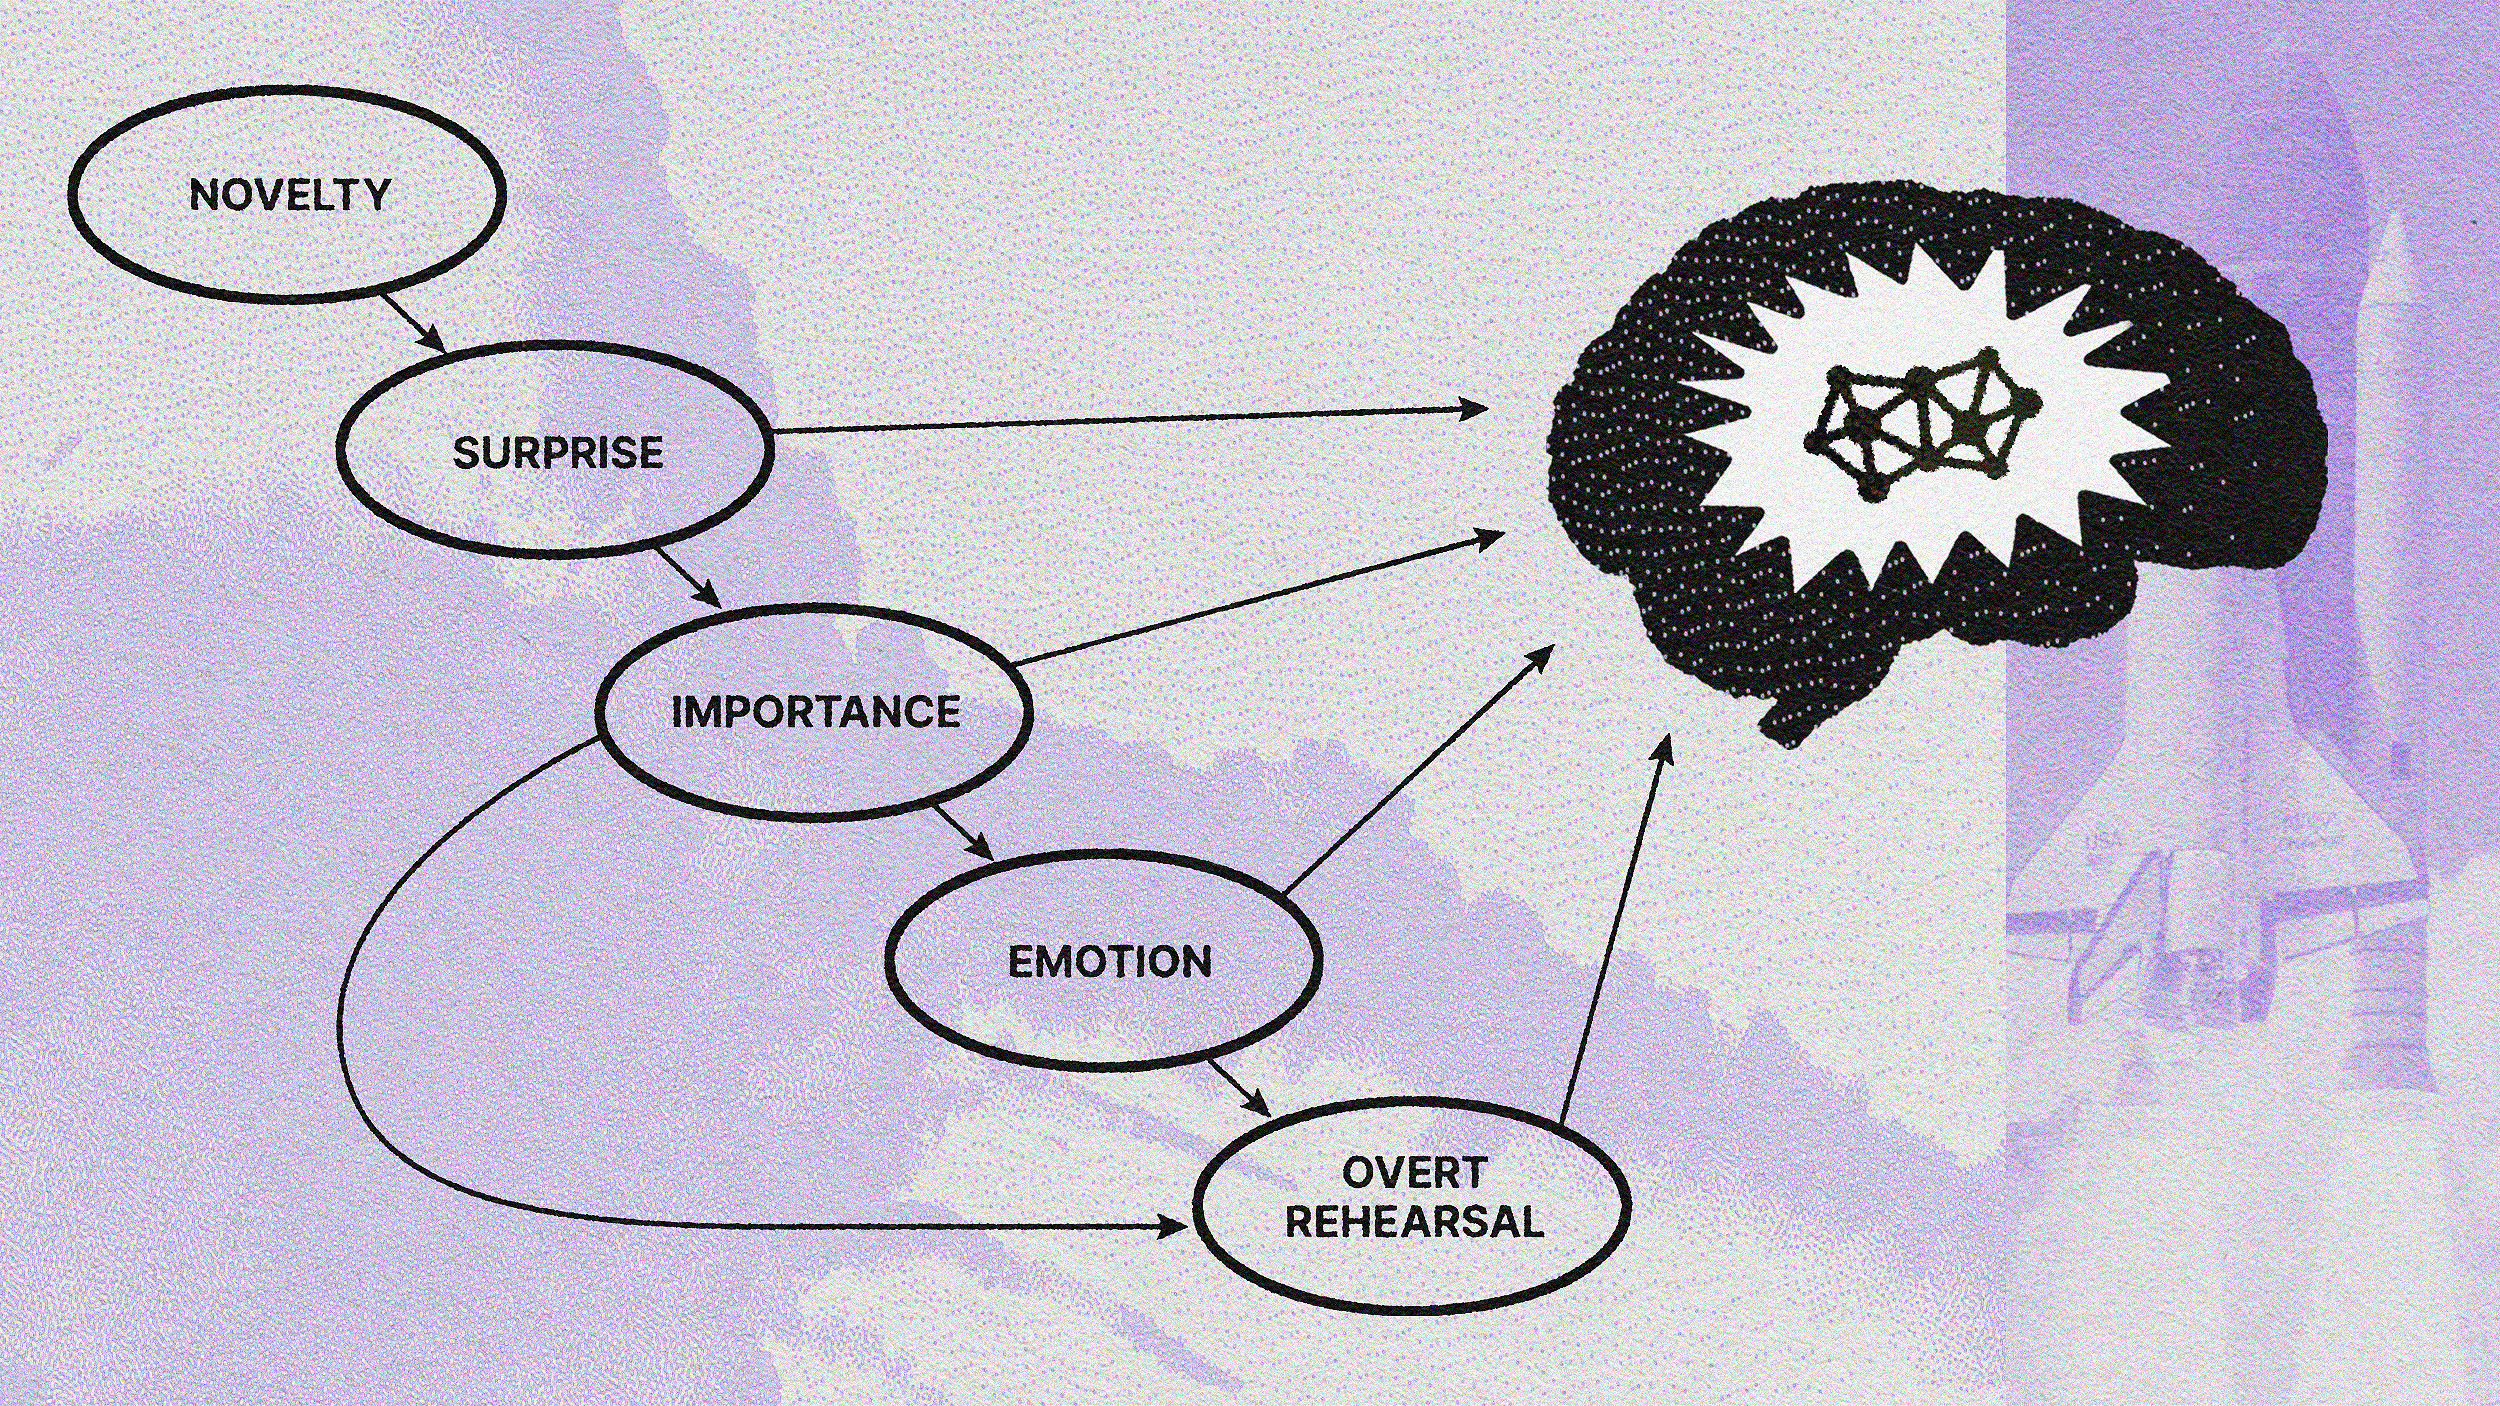 Illustration of a conceptual model showing factors like novelty, surprise, importance, emotion, flashbulb memories, and overt rehearsal linked to memory retention, symbolized by a brain icon.